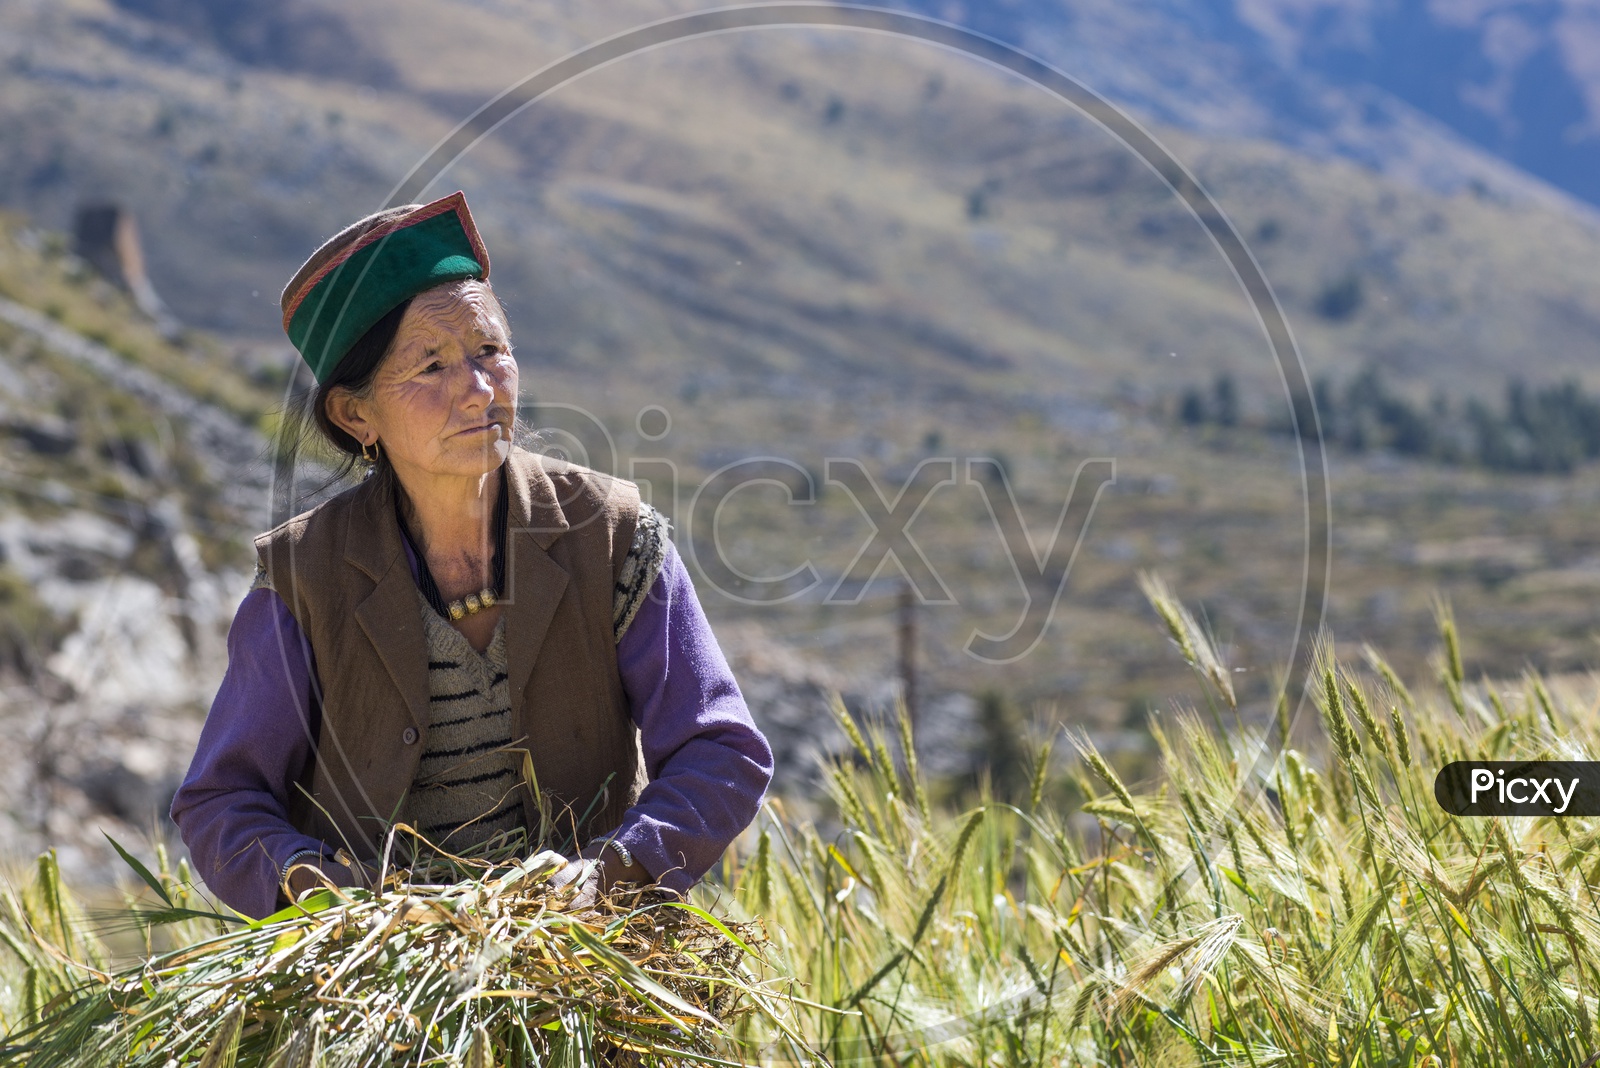 Farmers Started Harvesting the Wheat  Crop in Chitkul Village